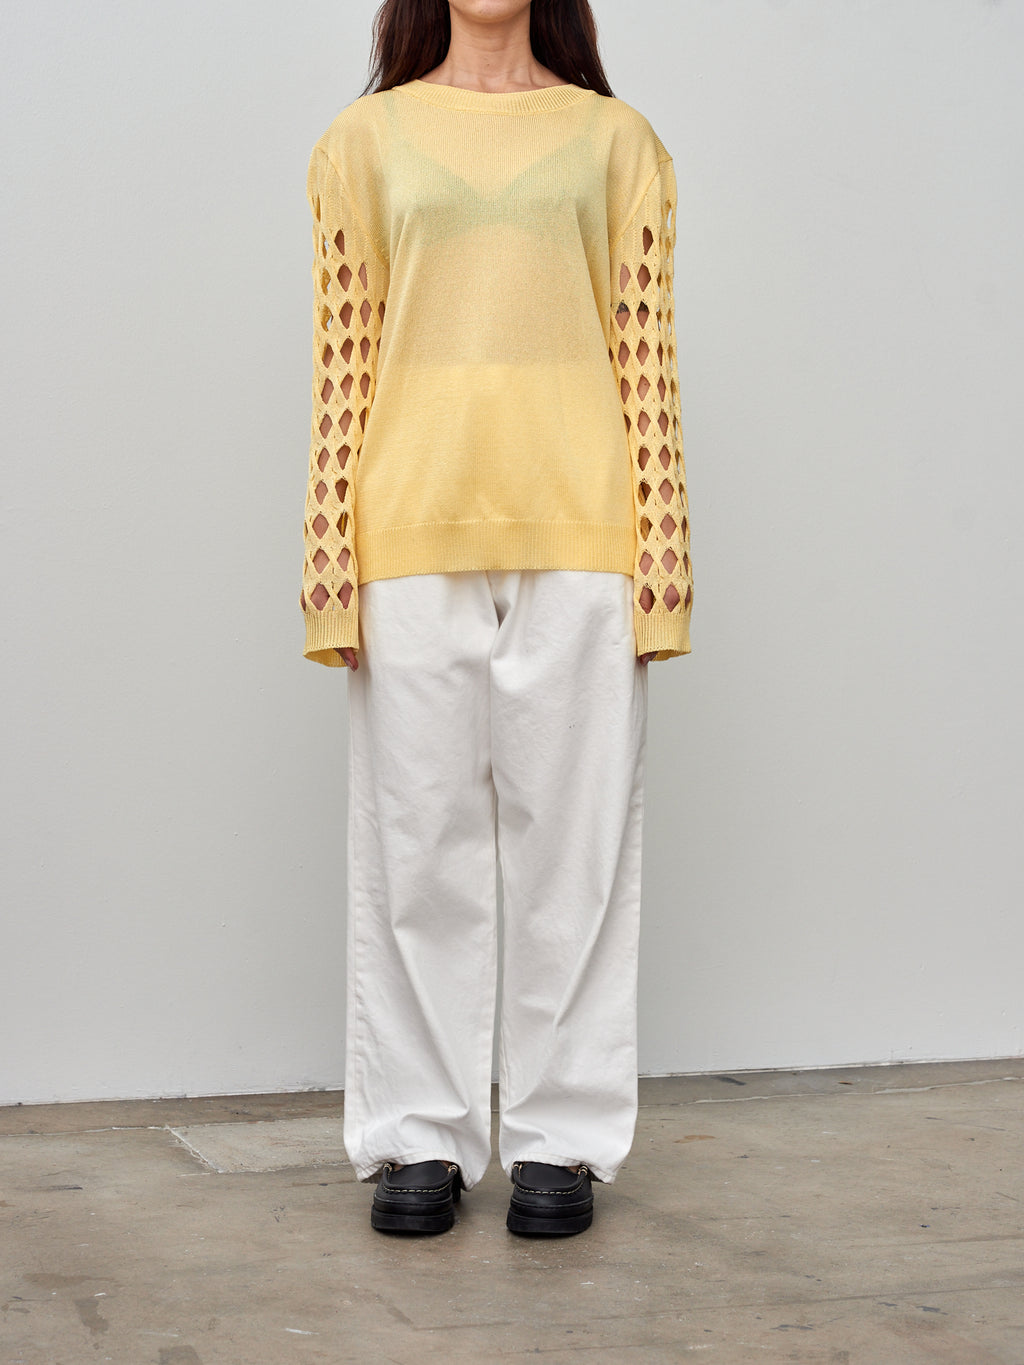 Namu Shop - Babaco Cable Sleeve Pullover - Cream Yellow